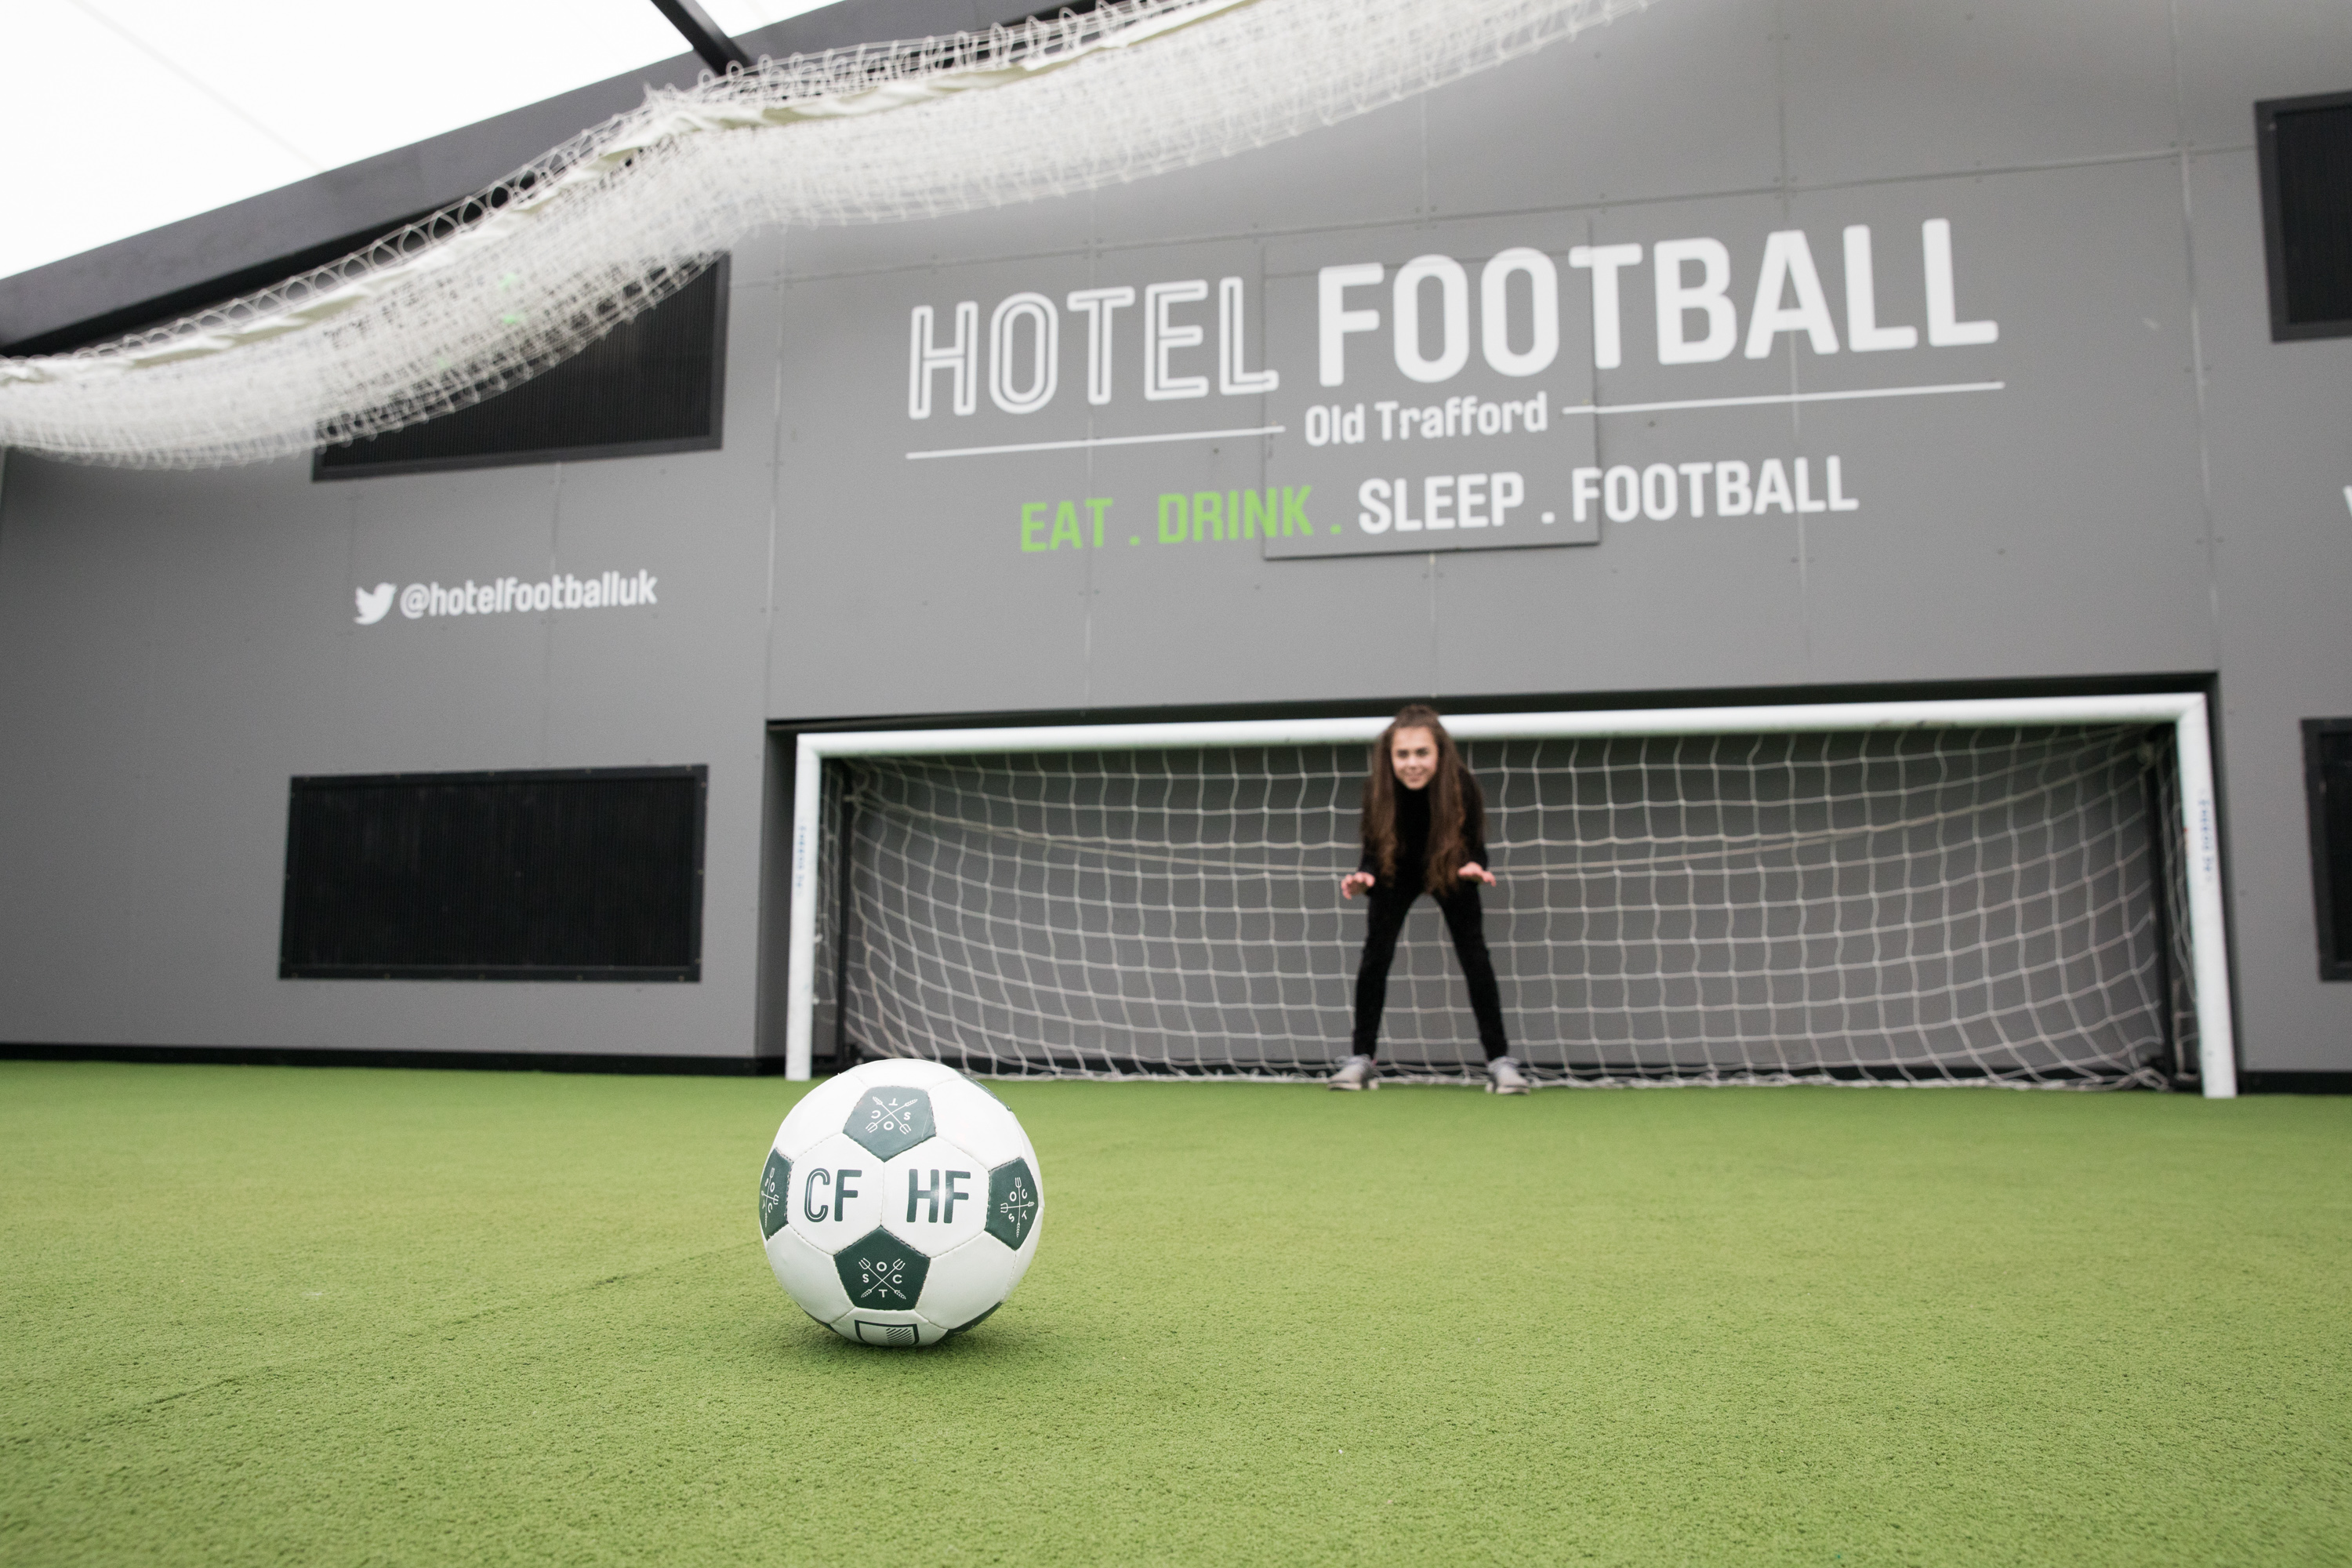 Hotel Football in Manchester is co-owned by Gary Neville, Ryan Giggs, Phil Neville, Paul Scholes and Nicky Butt